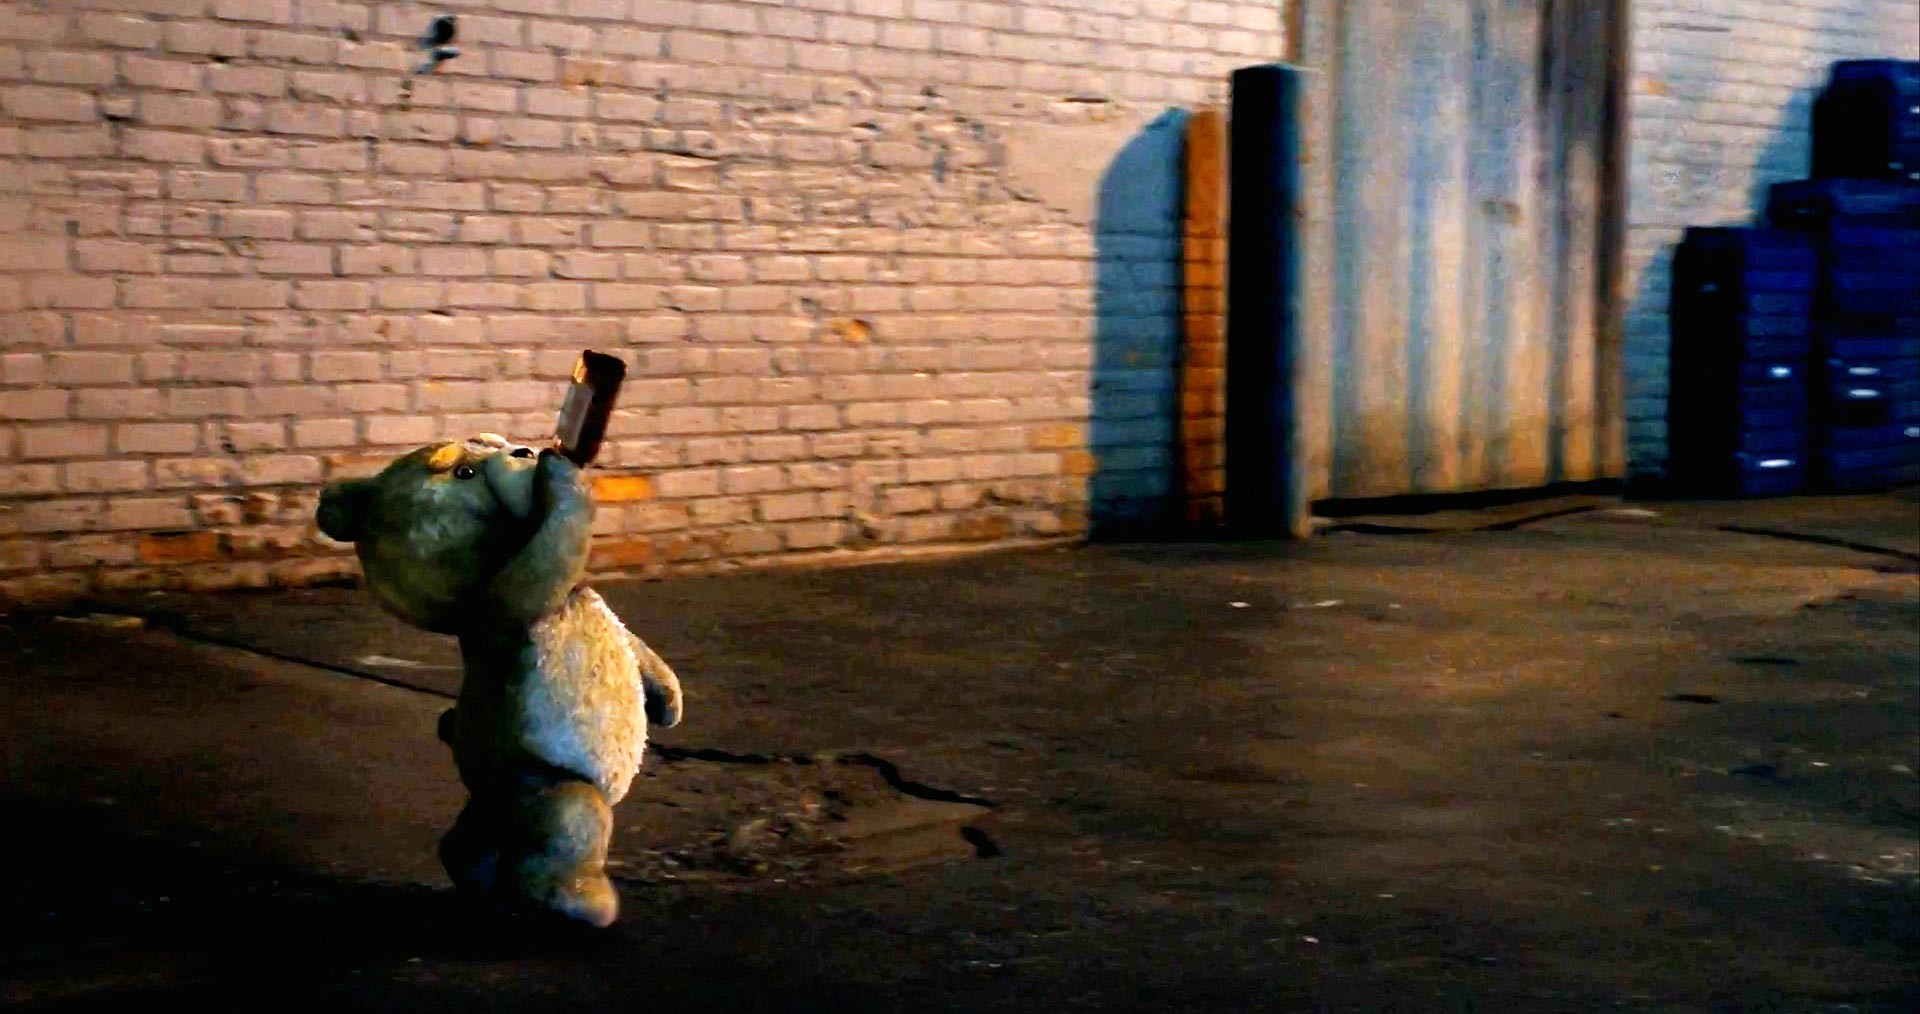 Ted from Universal Pictures' Ted (2012)